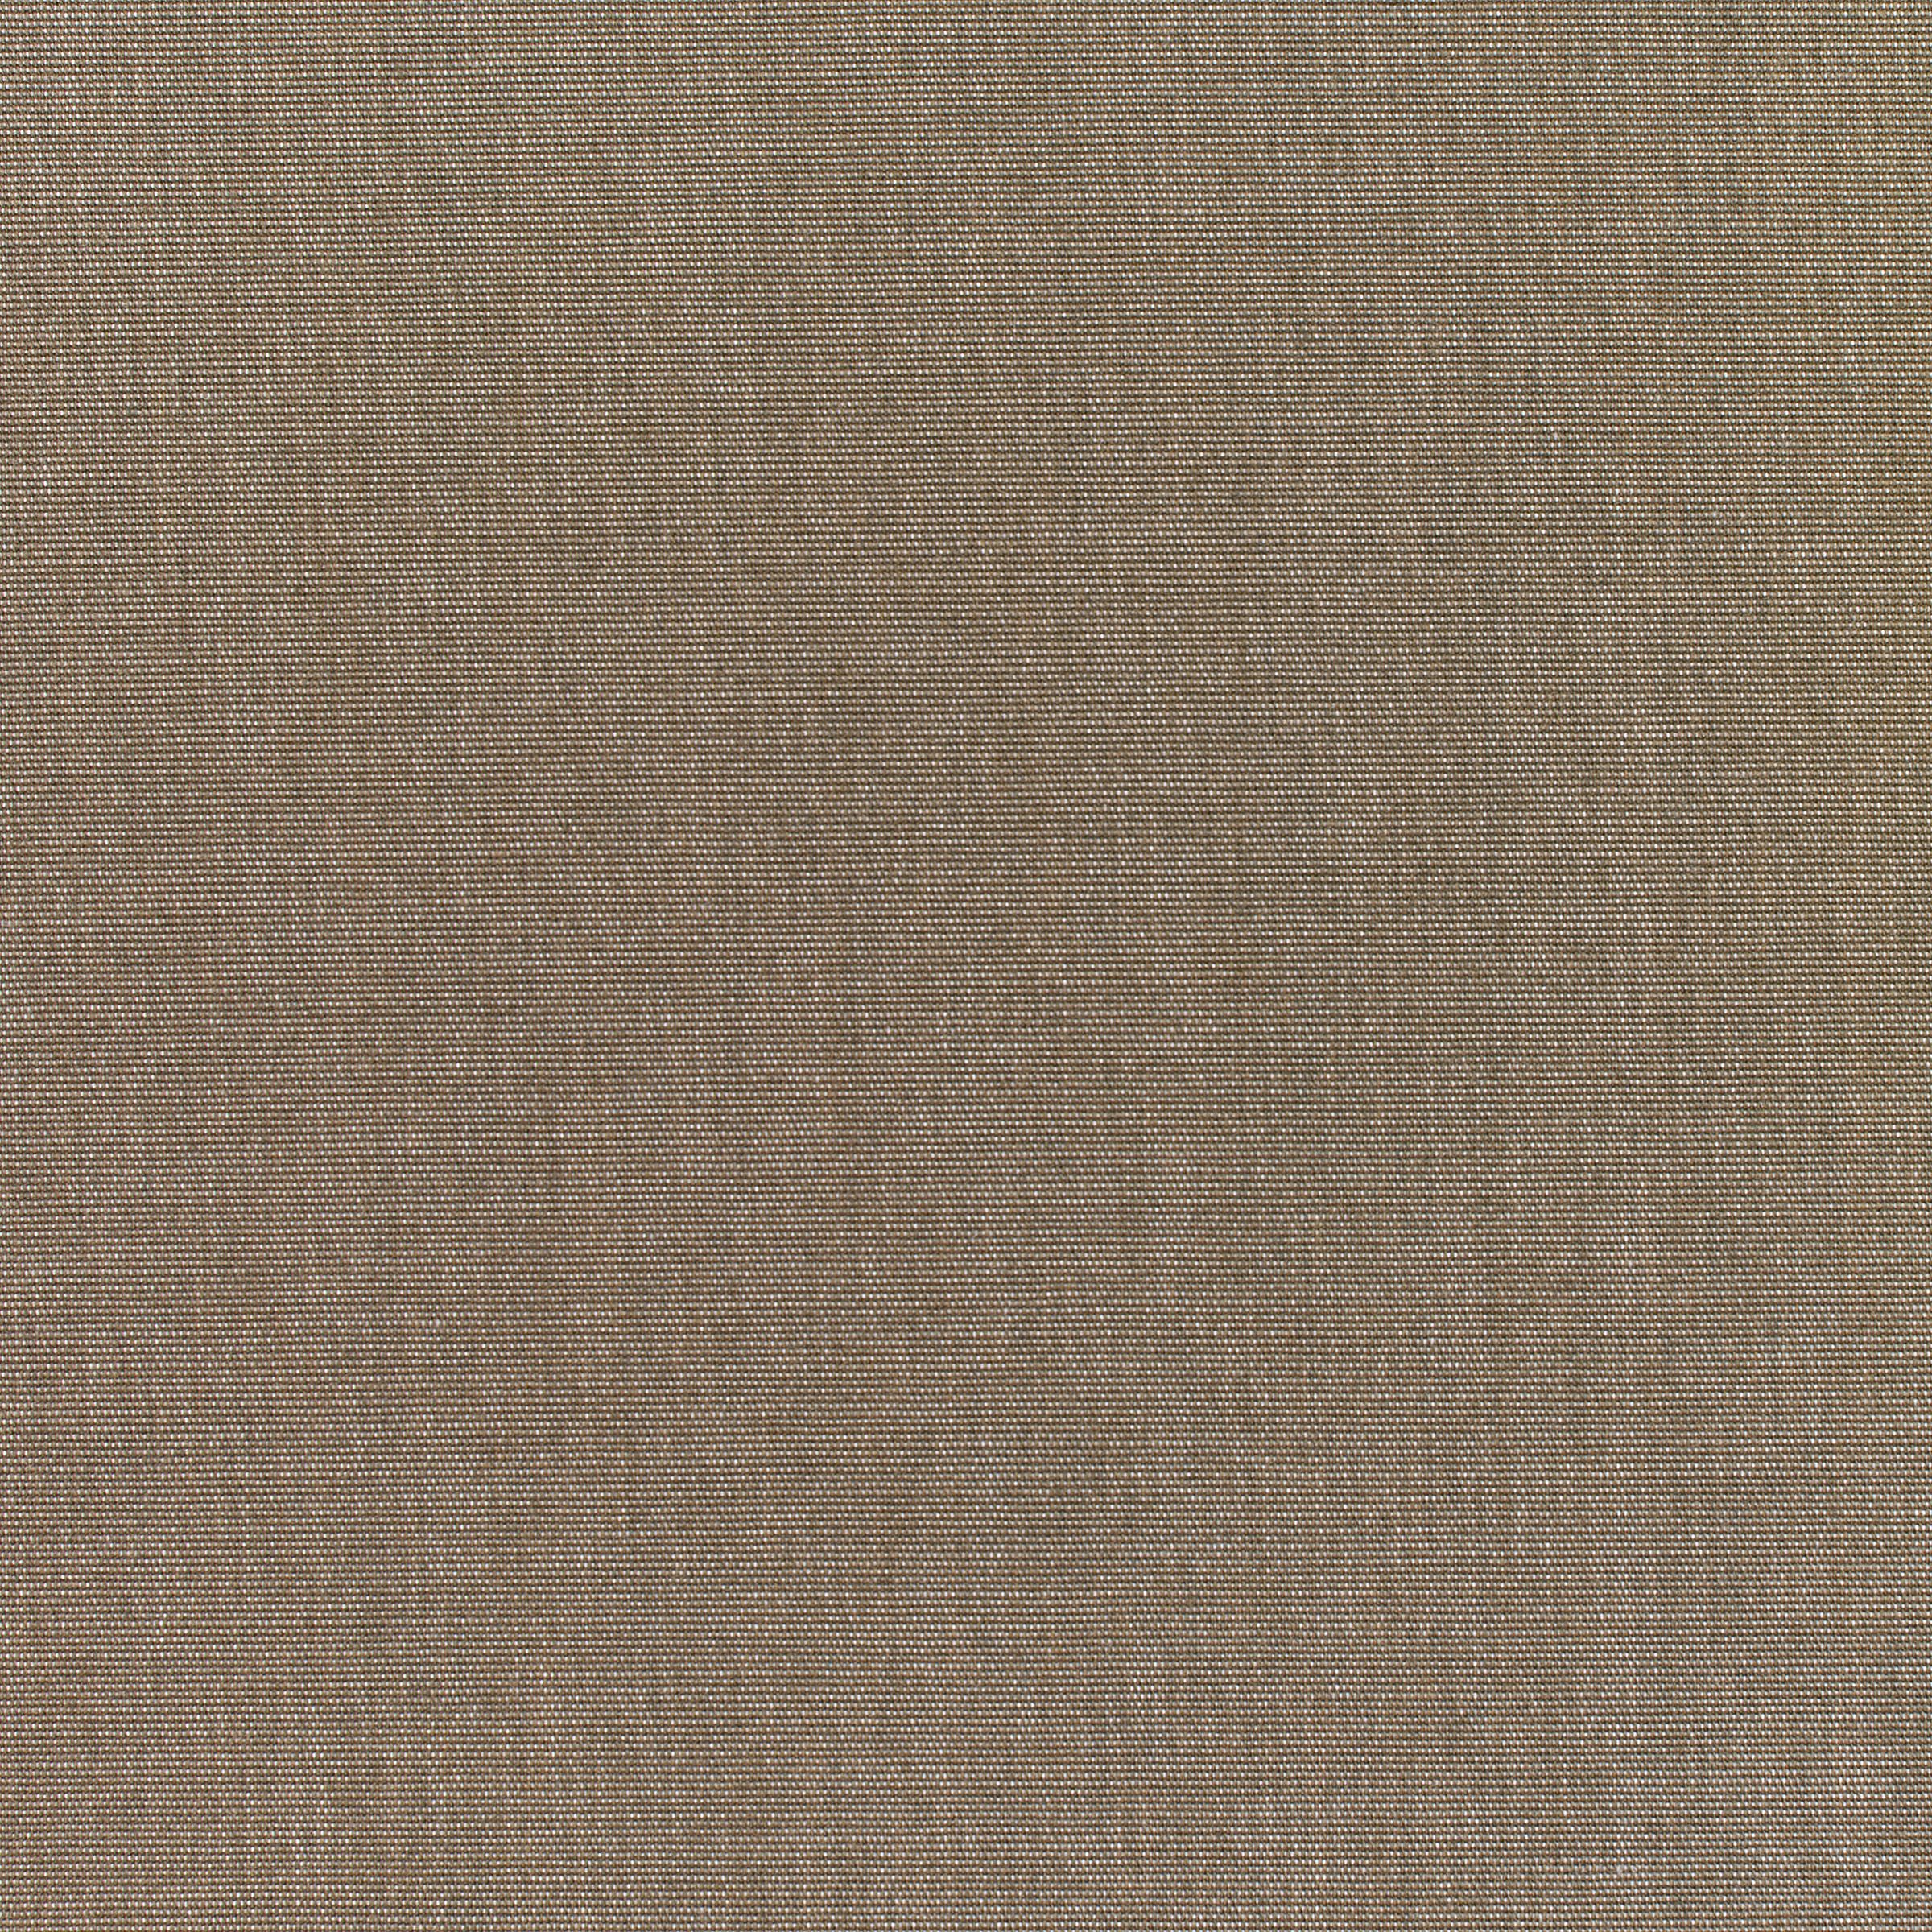 Fabric Color A – Taupe 5461 Swatch